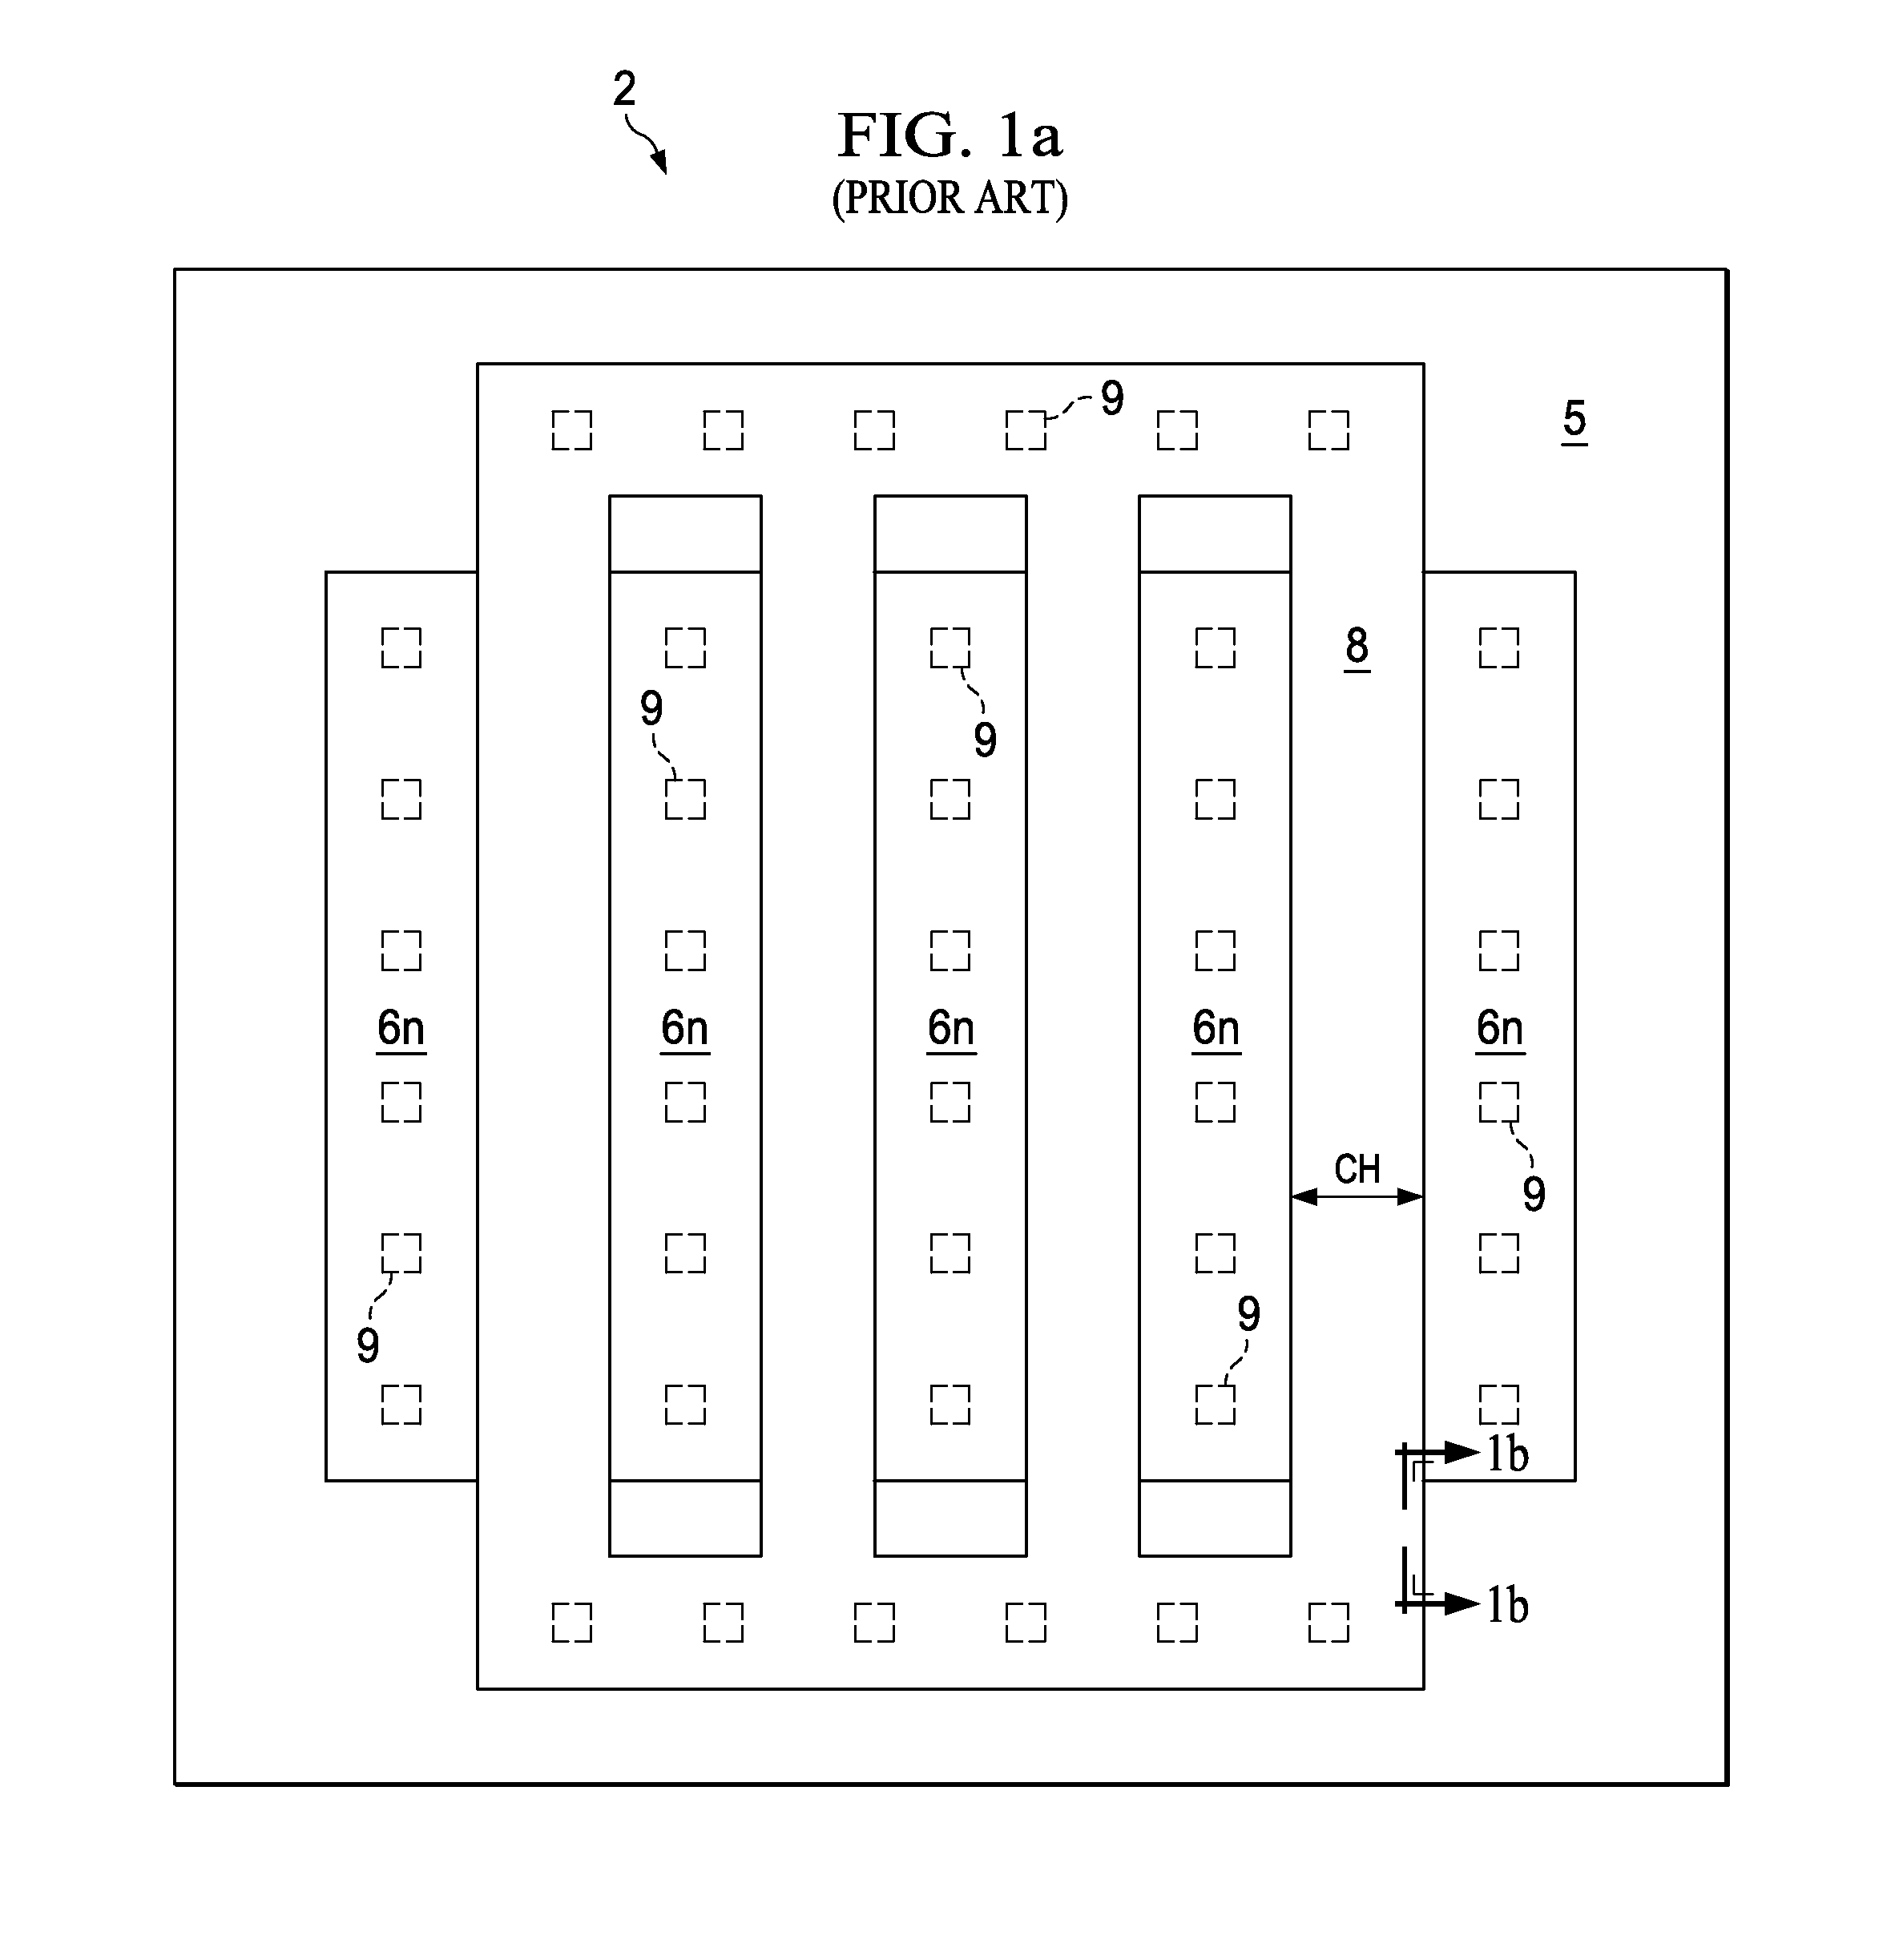 I-shaped gate electrode for improved sub-threshold mosfet performance